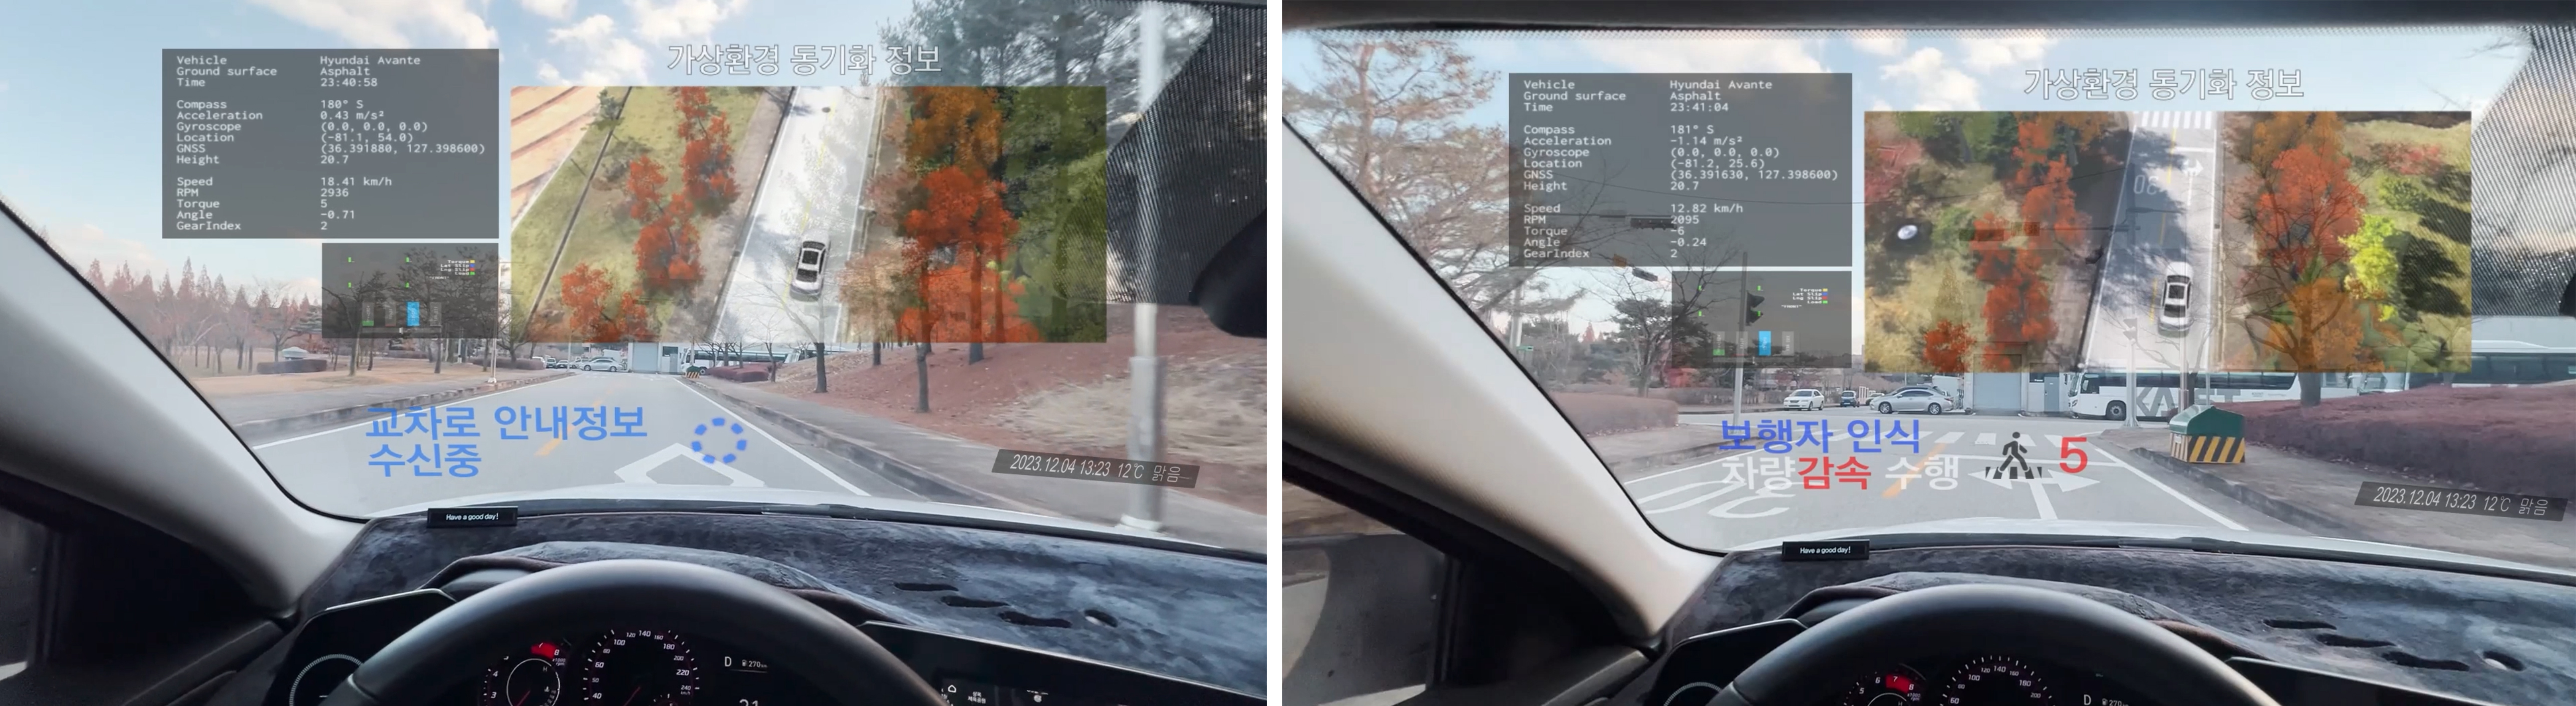 Figure 2. In car information through the head-up display (HUD) mockup